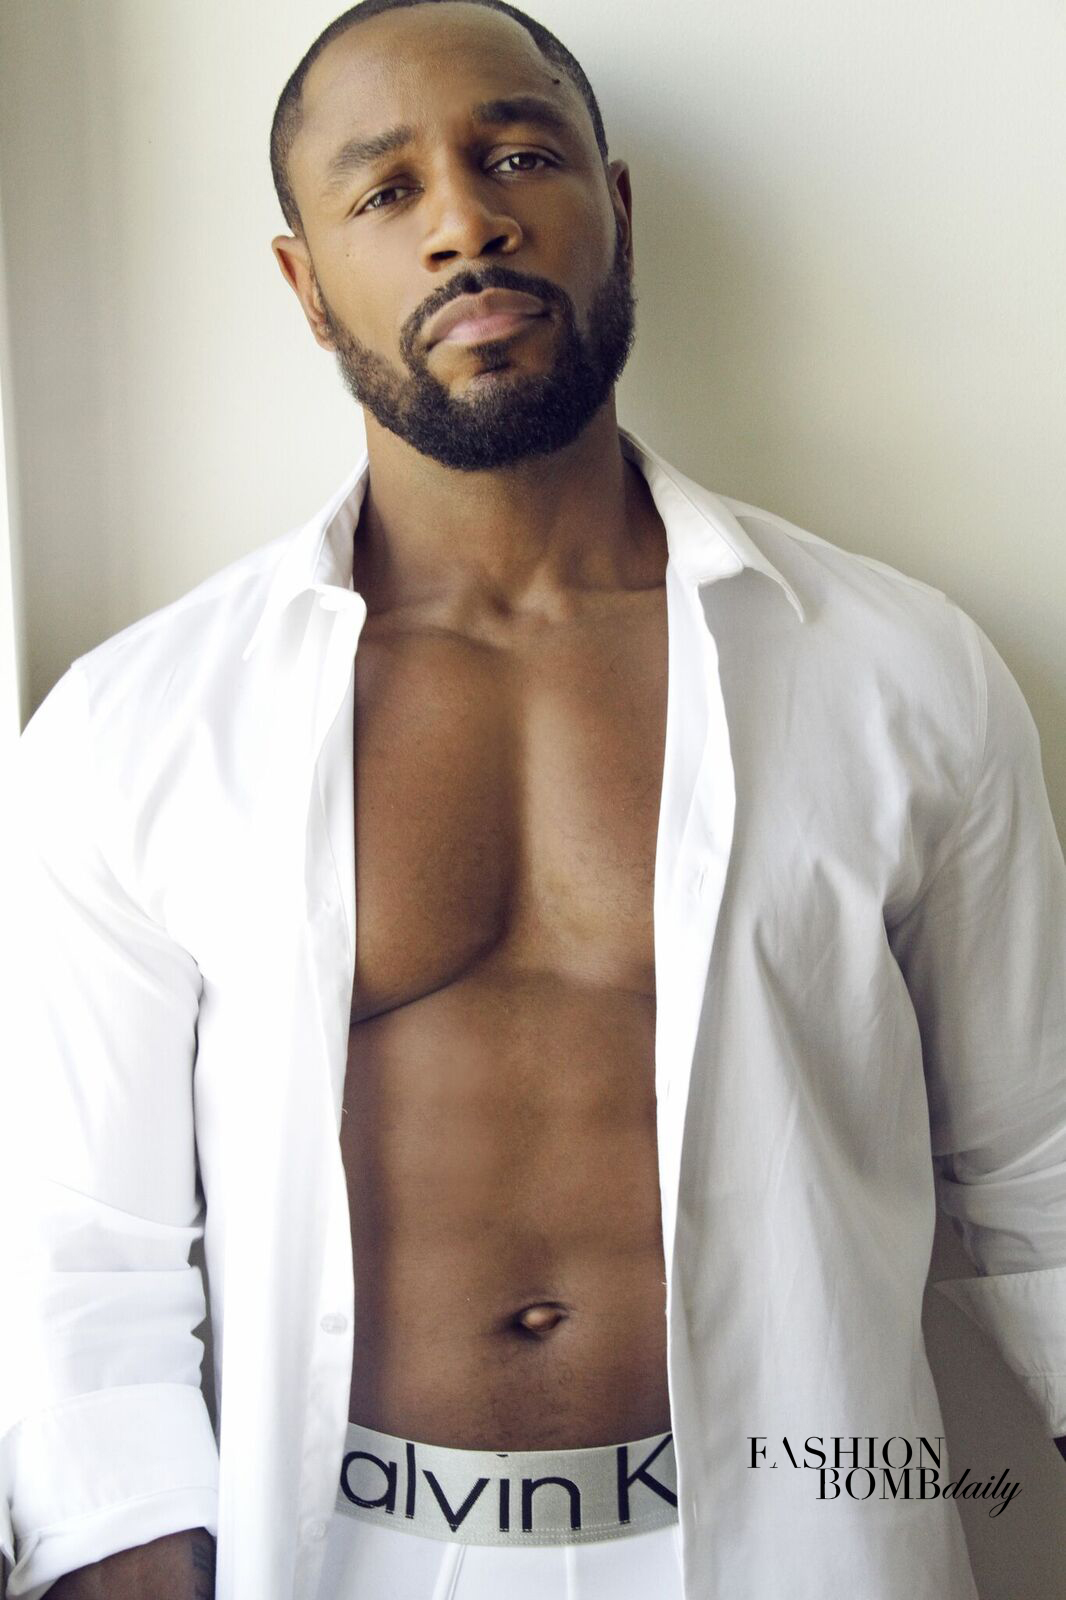 Today’s subject: the sultry R&B singer Tank who just dropped his latest...